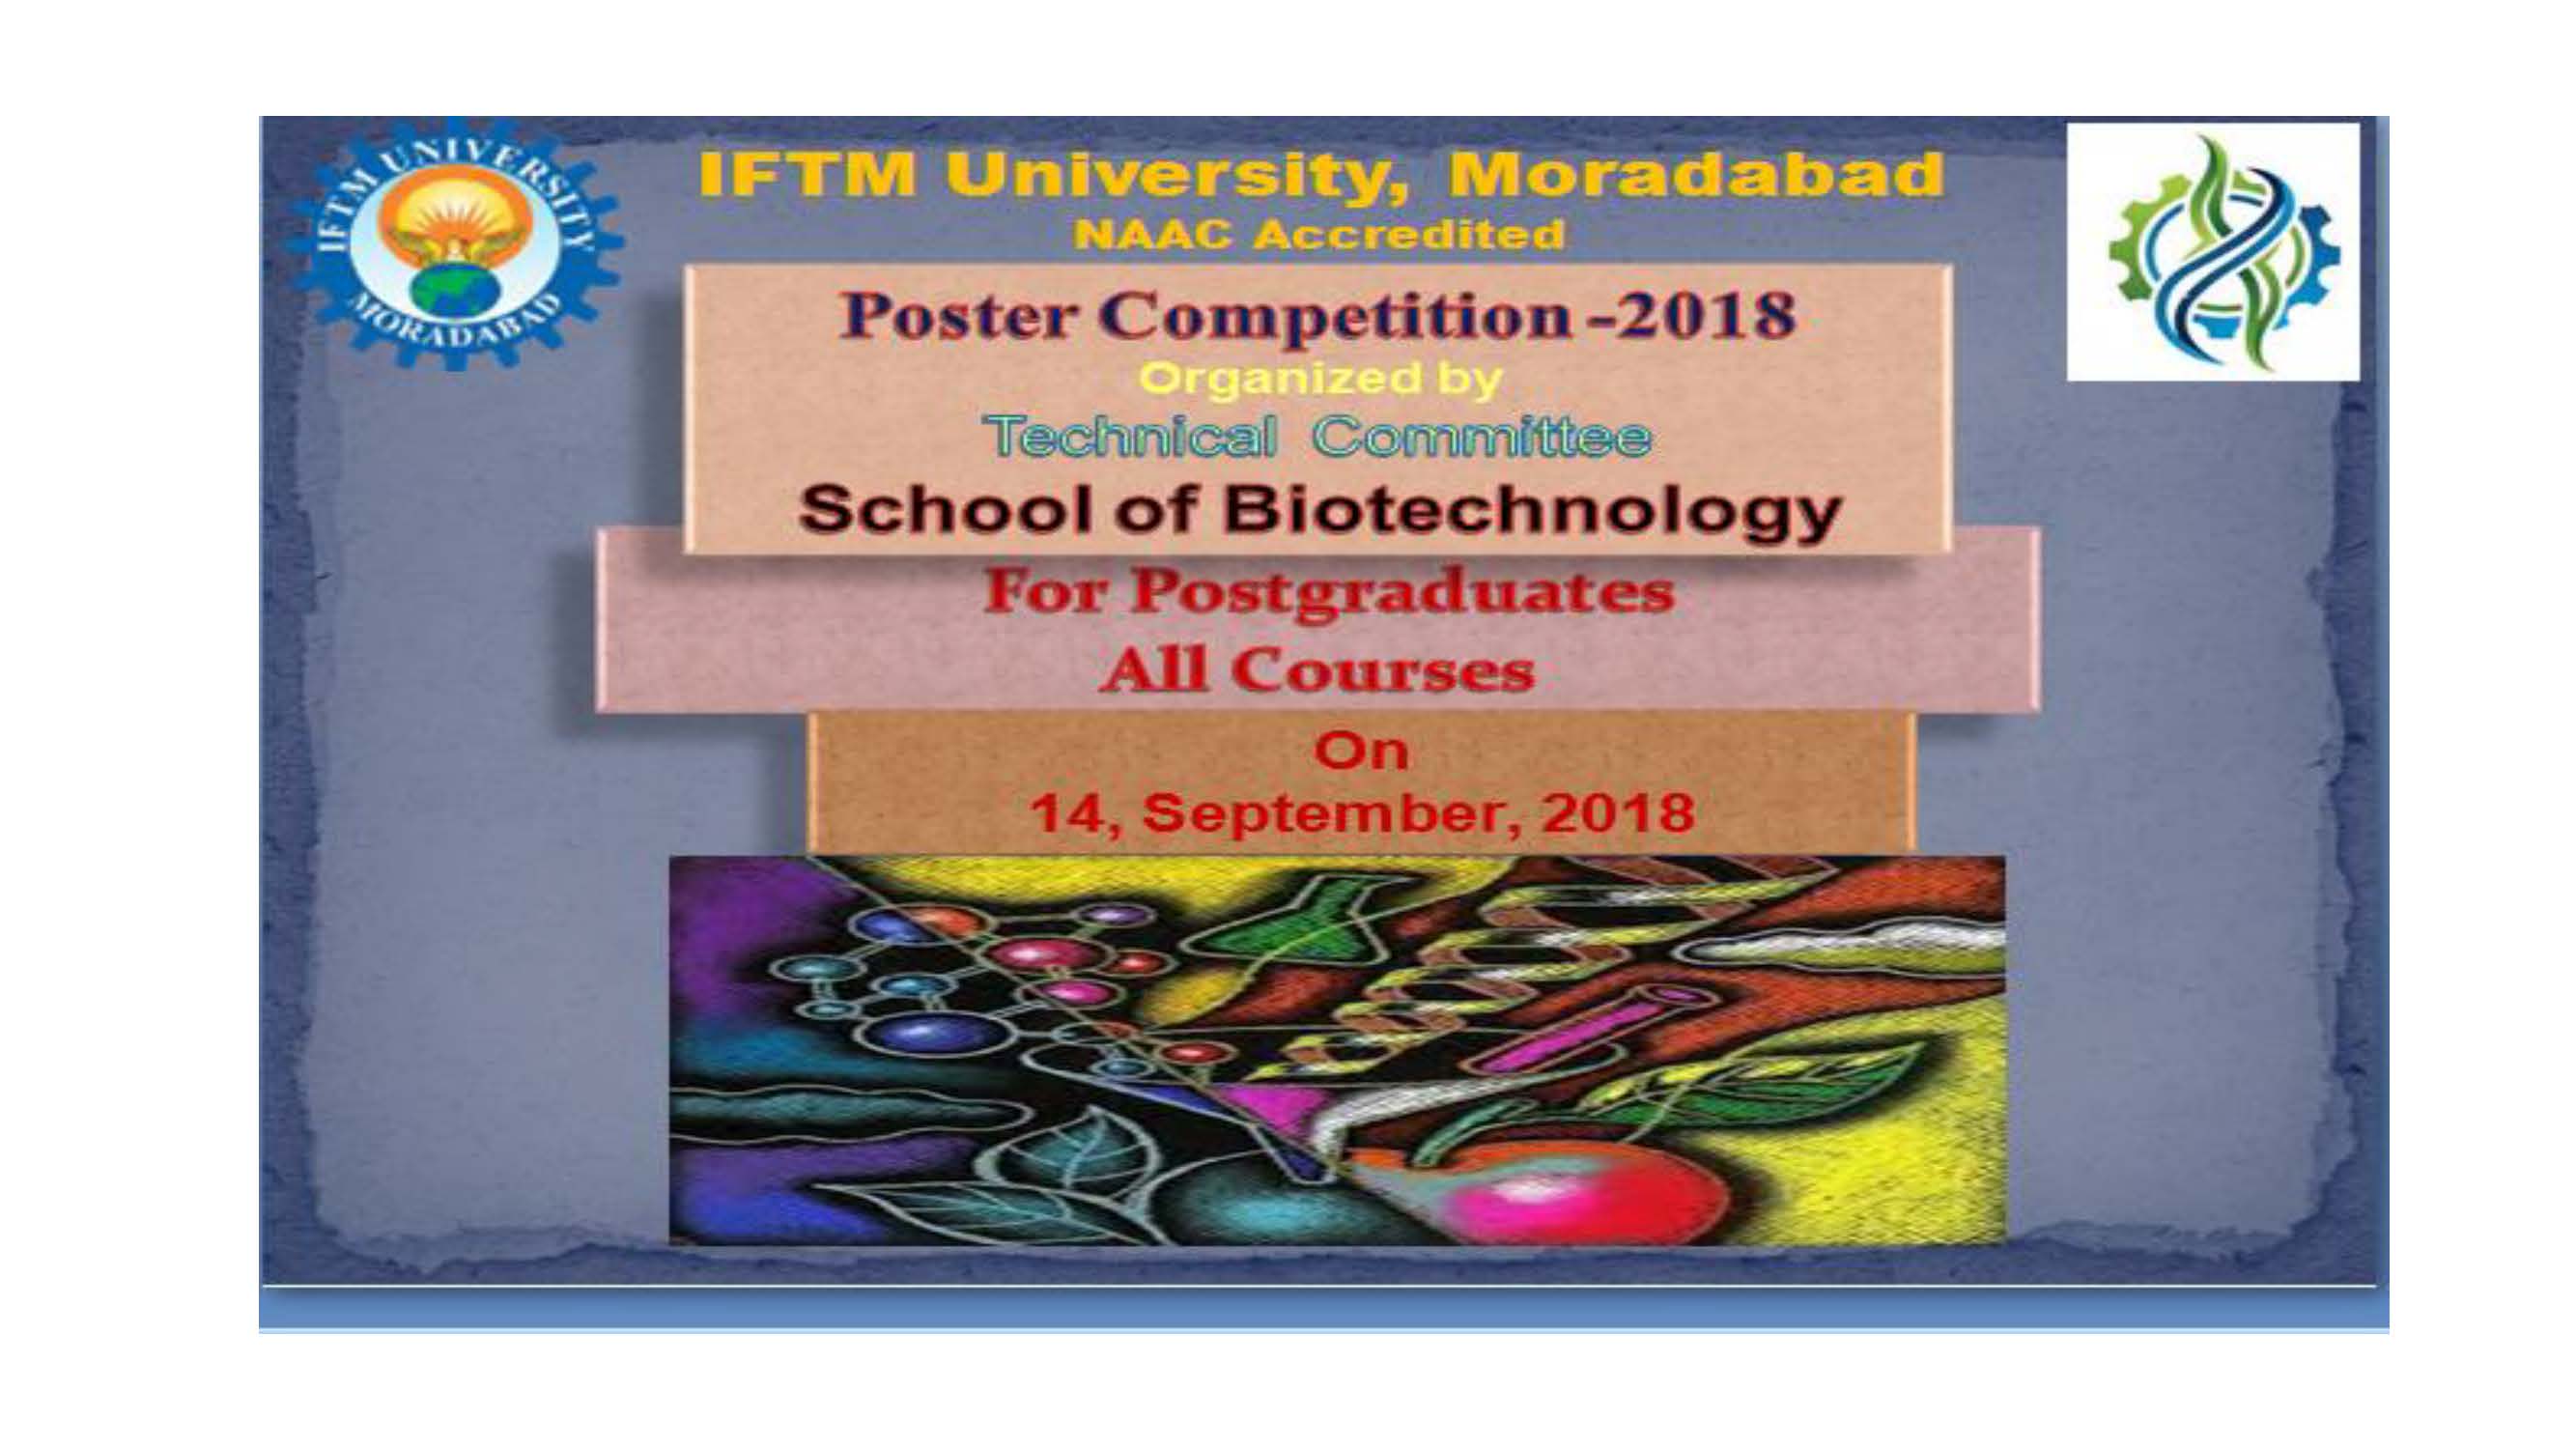 Poster Competition - 2018